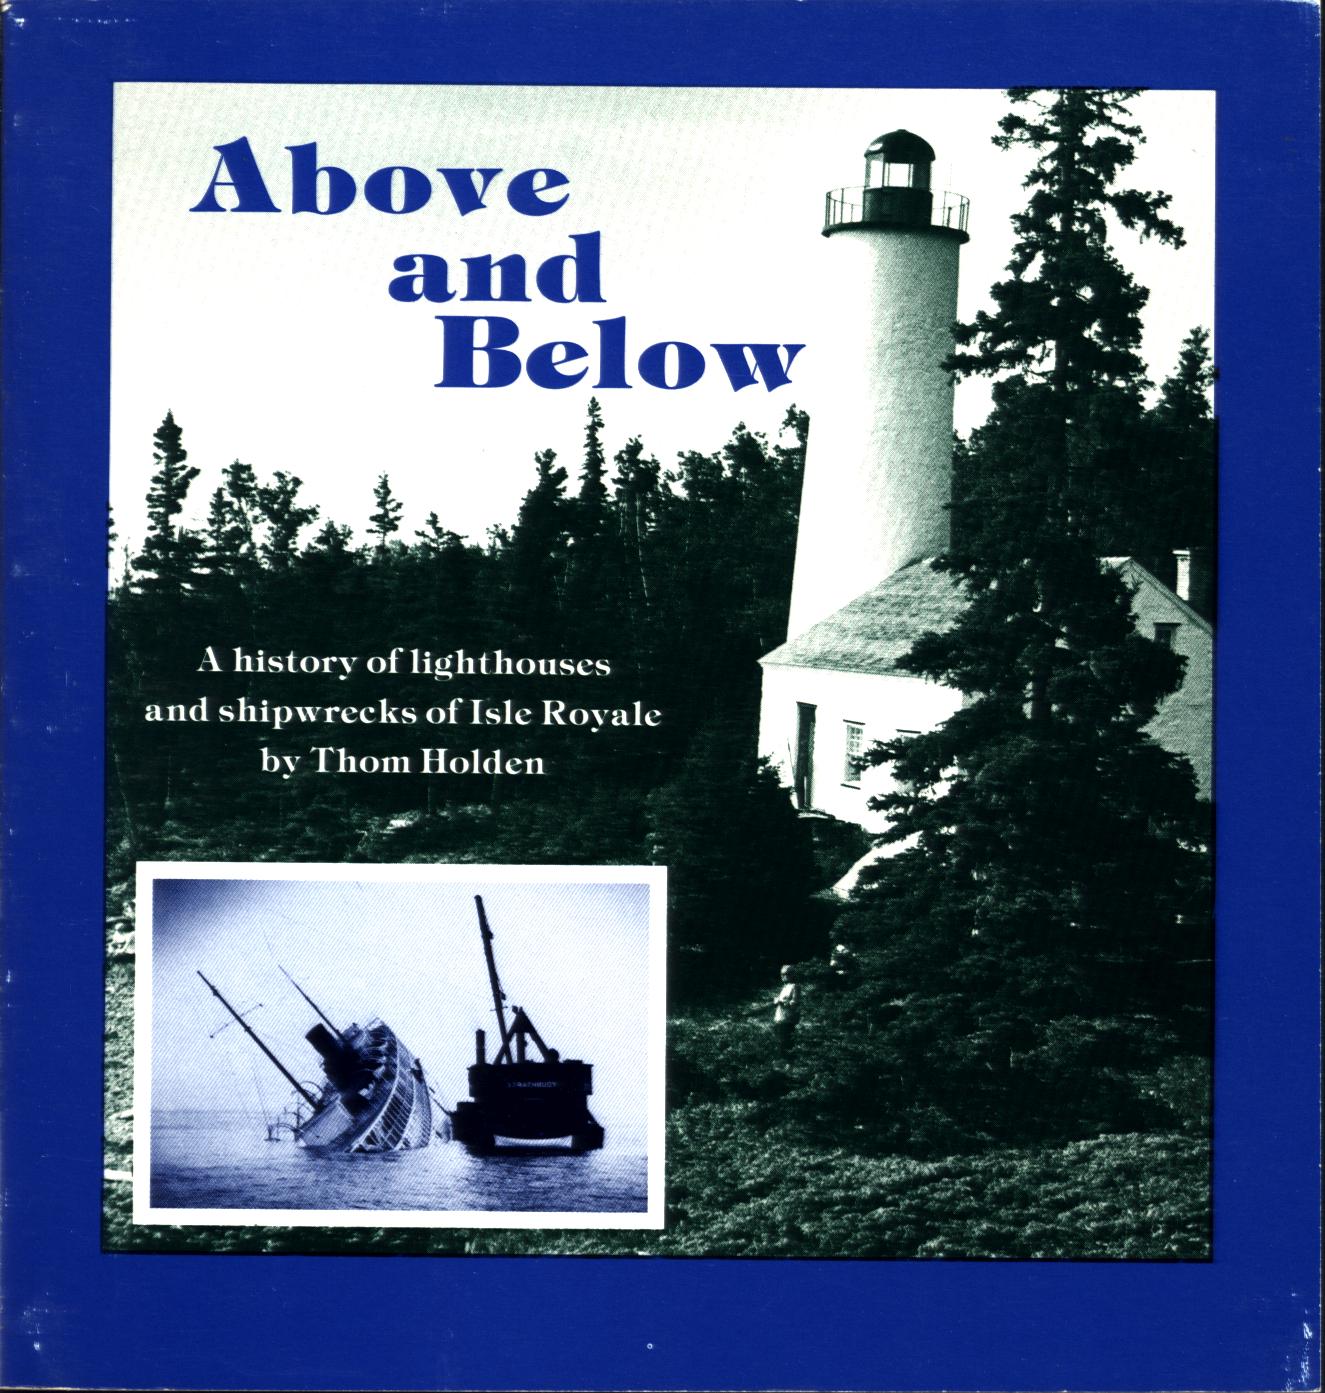 ABOVE AND BELOW: a history of lighthouses and shipwrecks of Isle Royale. 